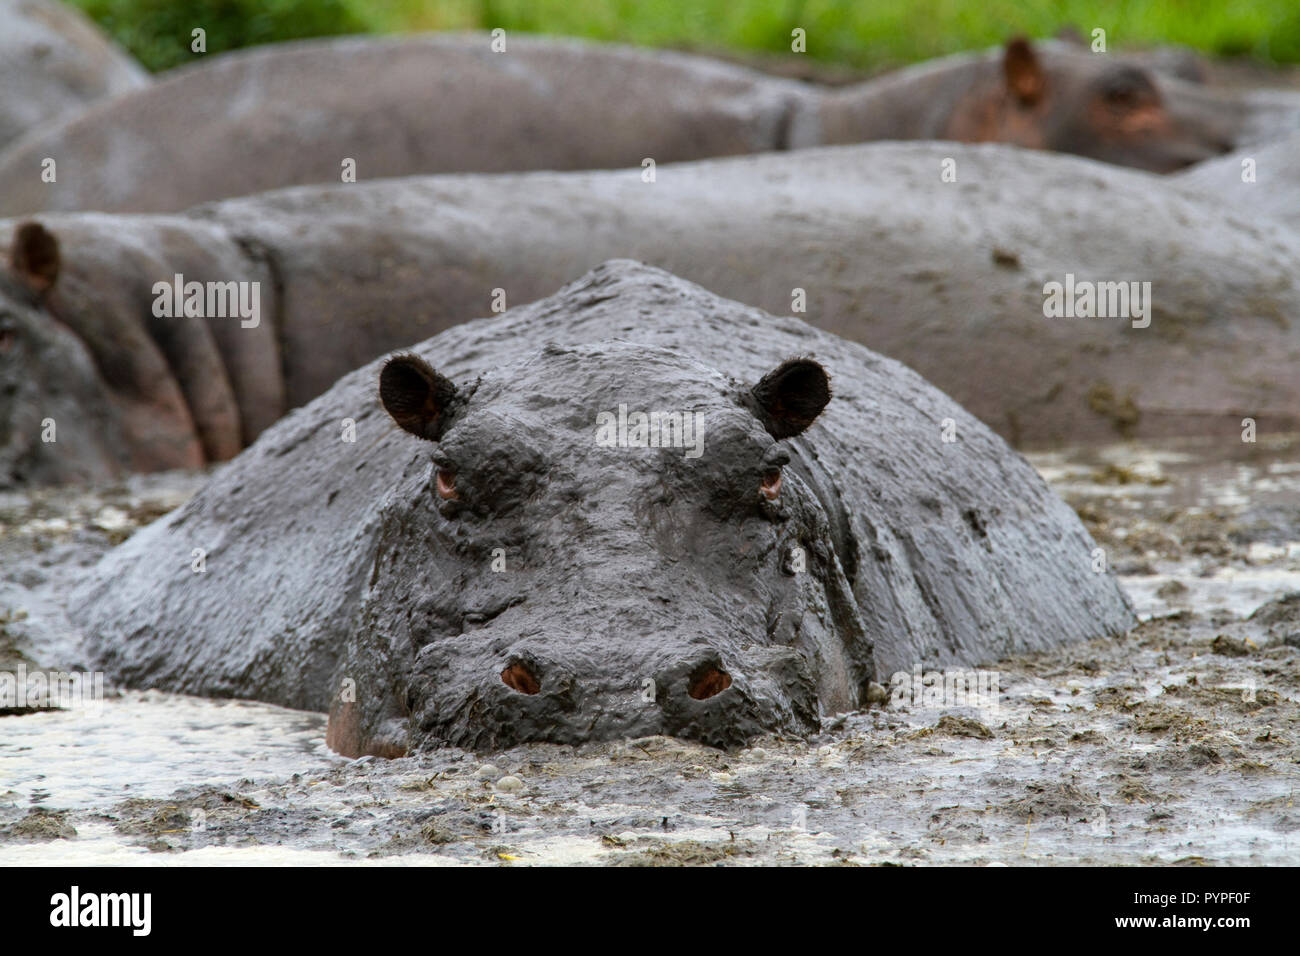 The hippo has very sensitive skin that easy dries and burns so they like to wallow in mud baths as part of their skin care process Stock Photo